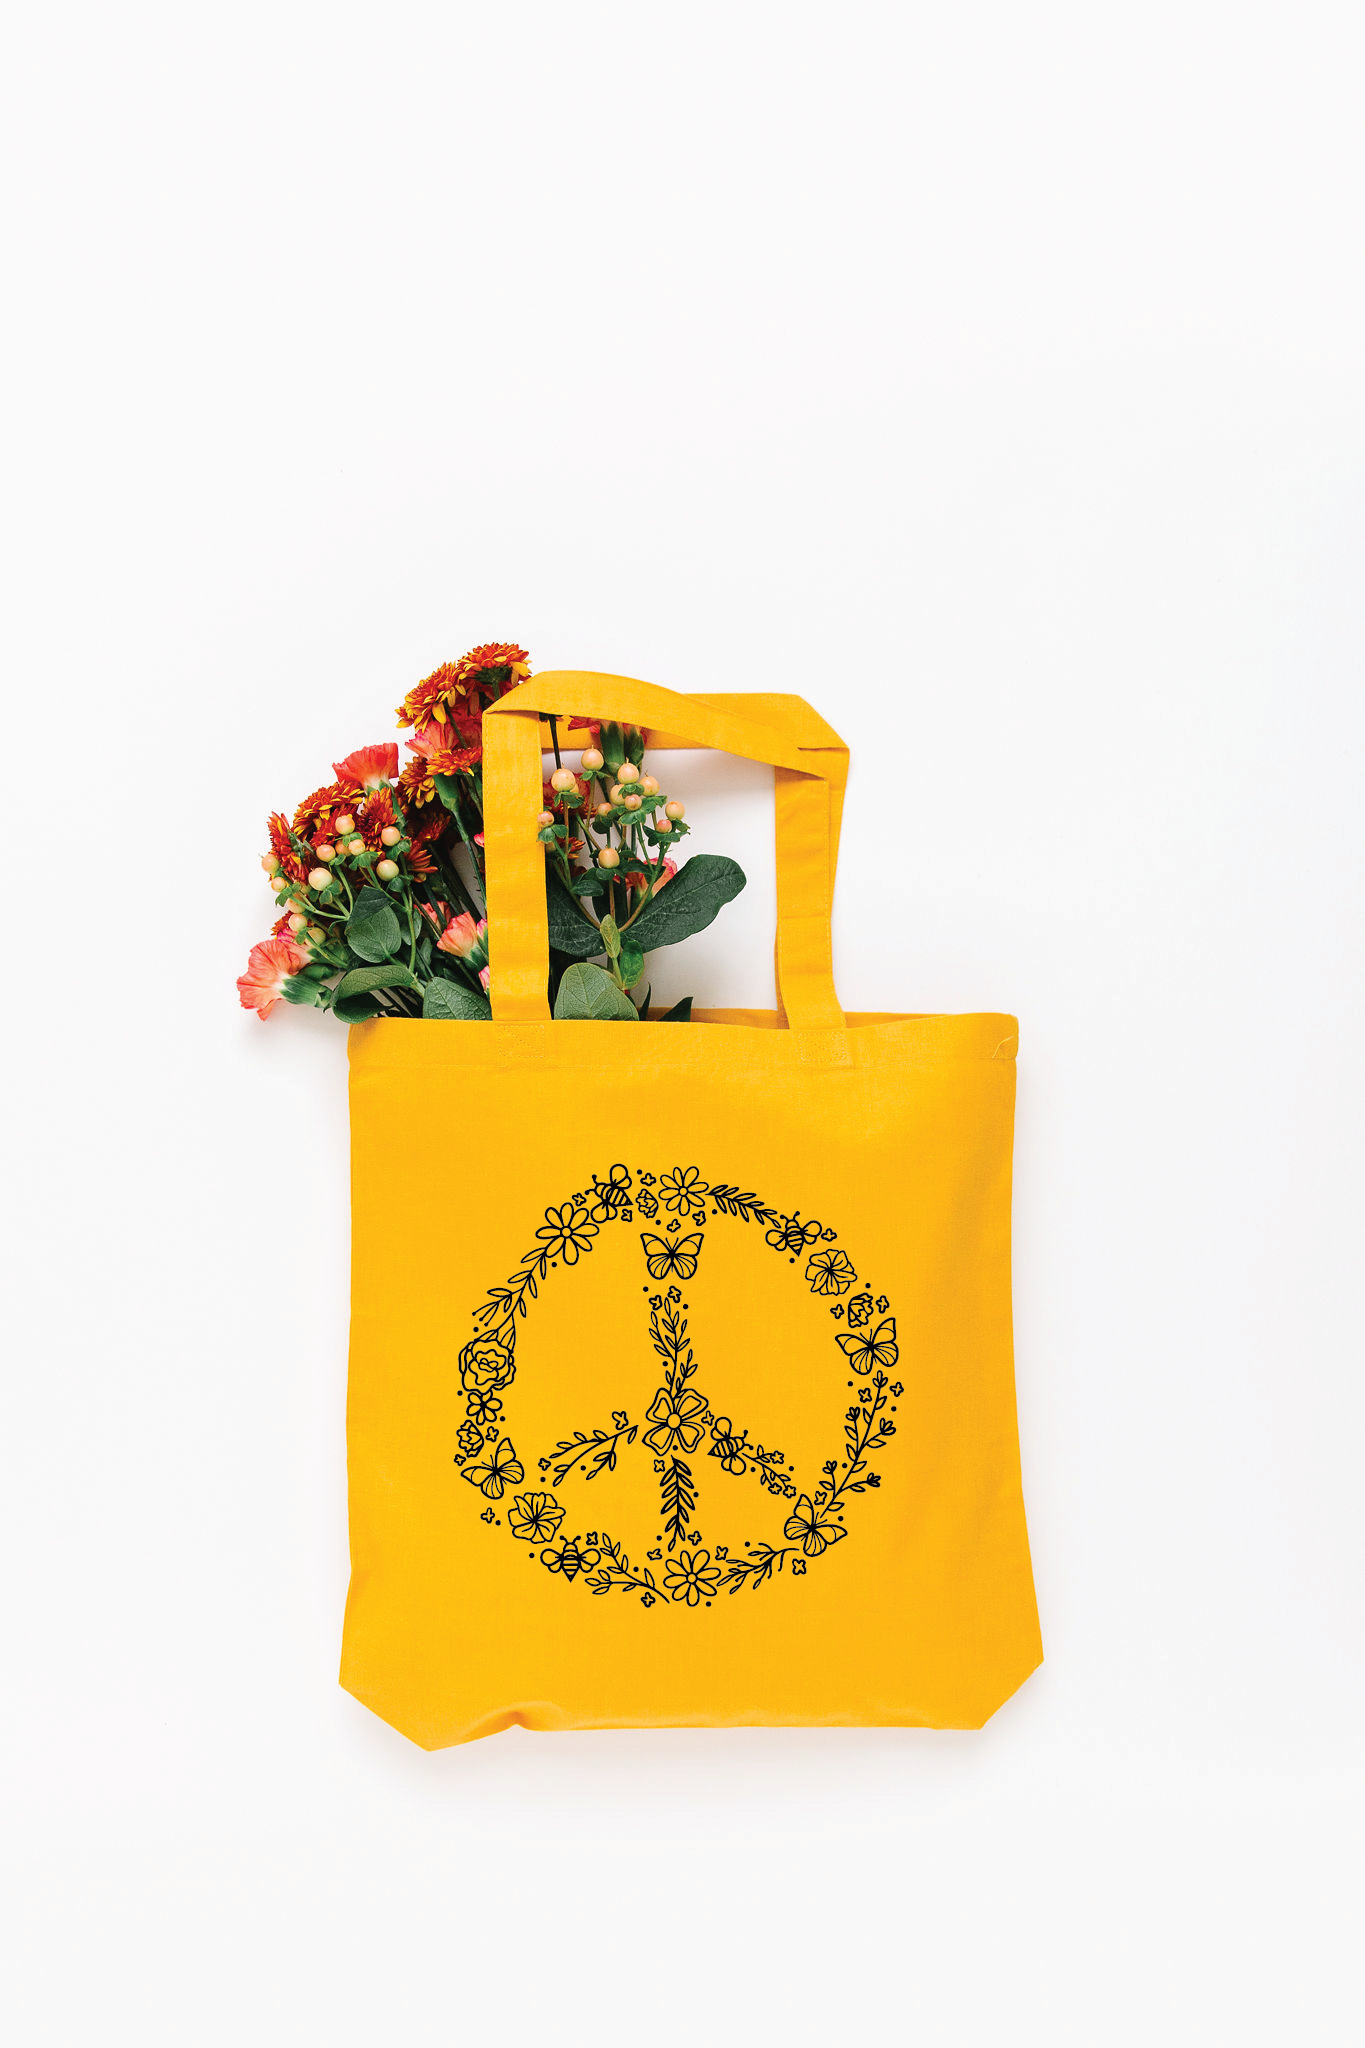 Is Purse Peace Possible?